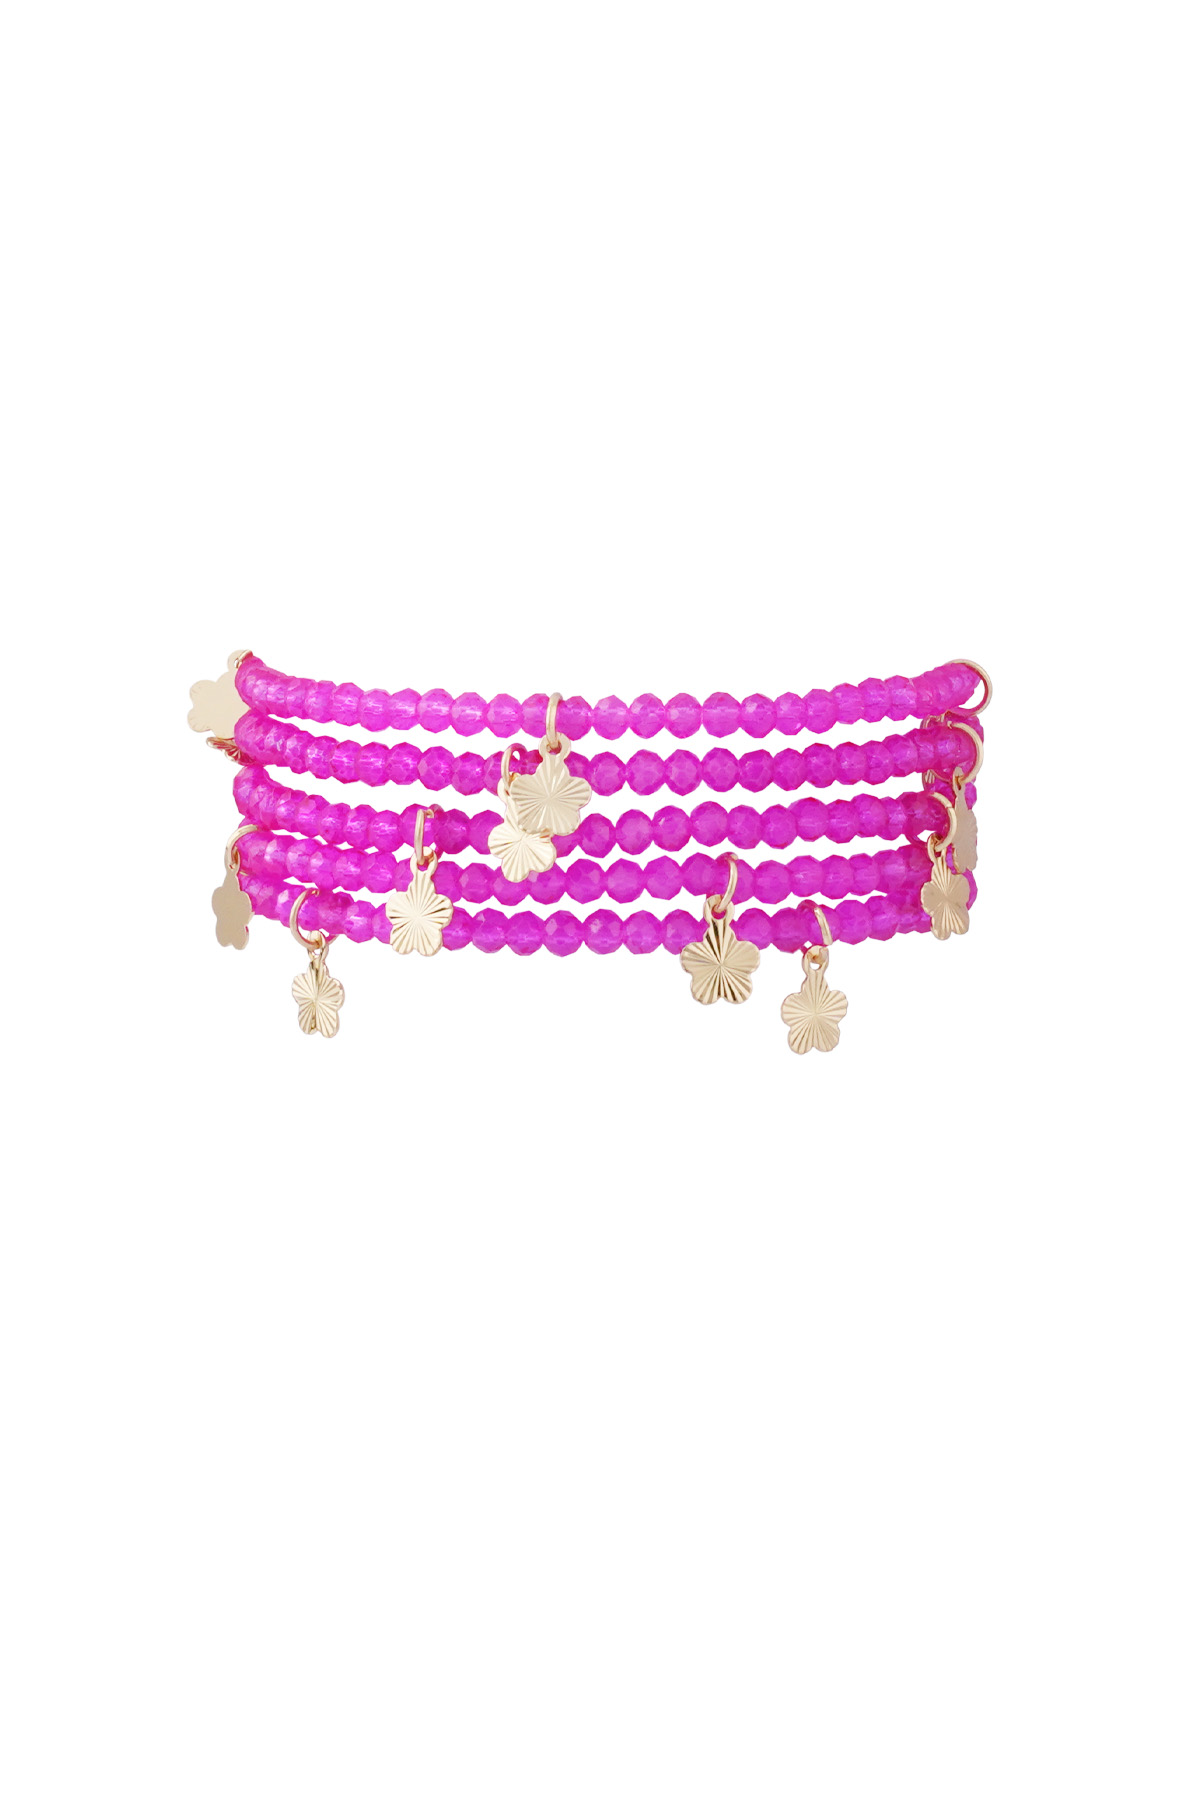 Double bracelet with flower charms - fuchsia 